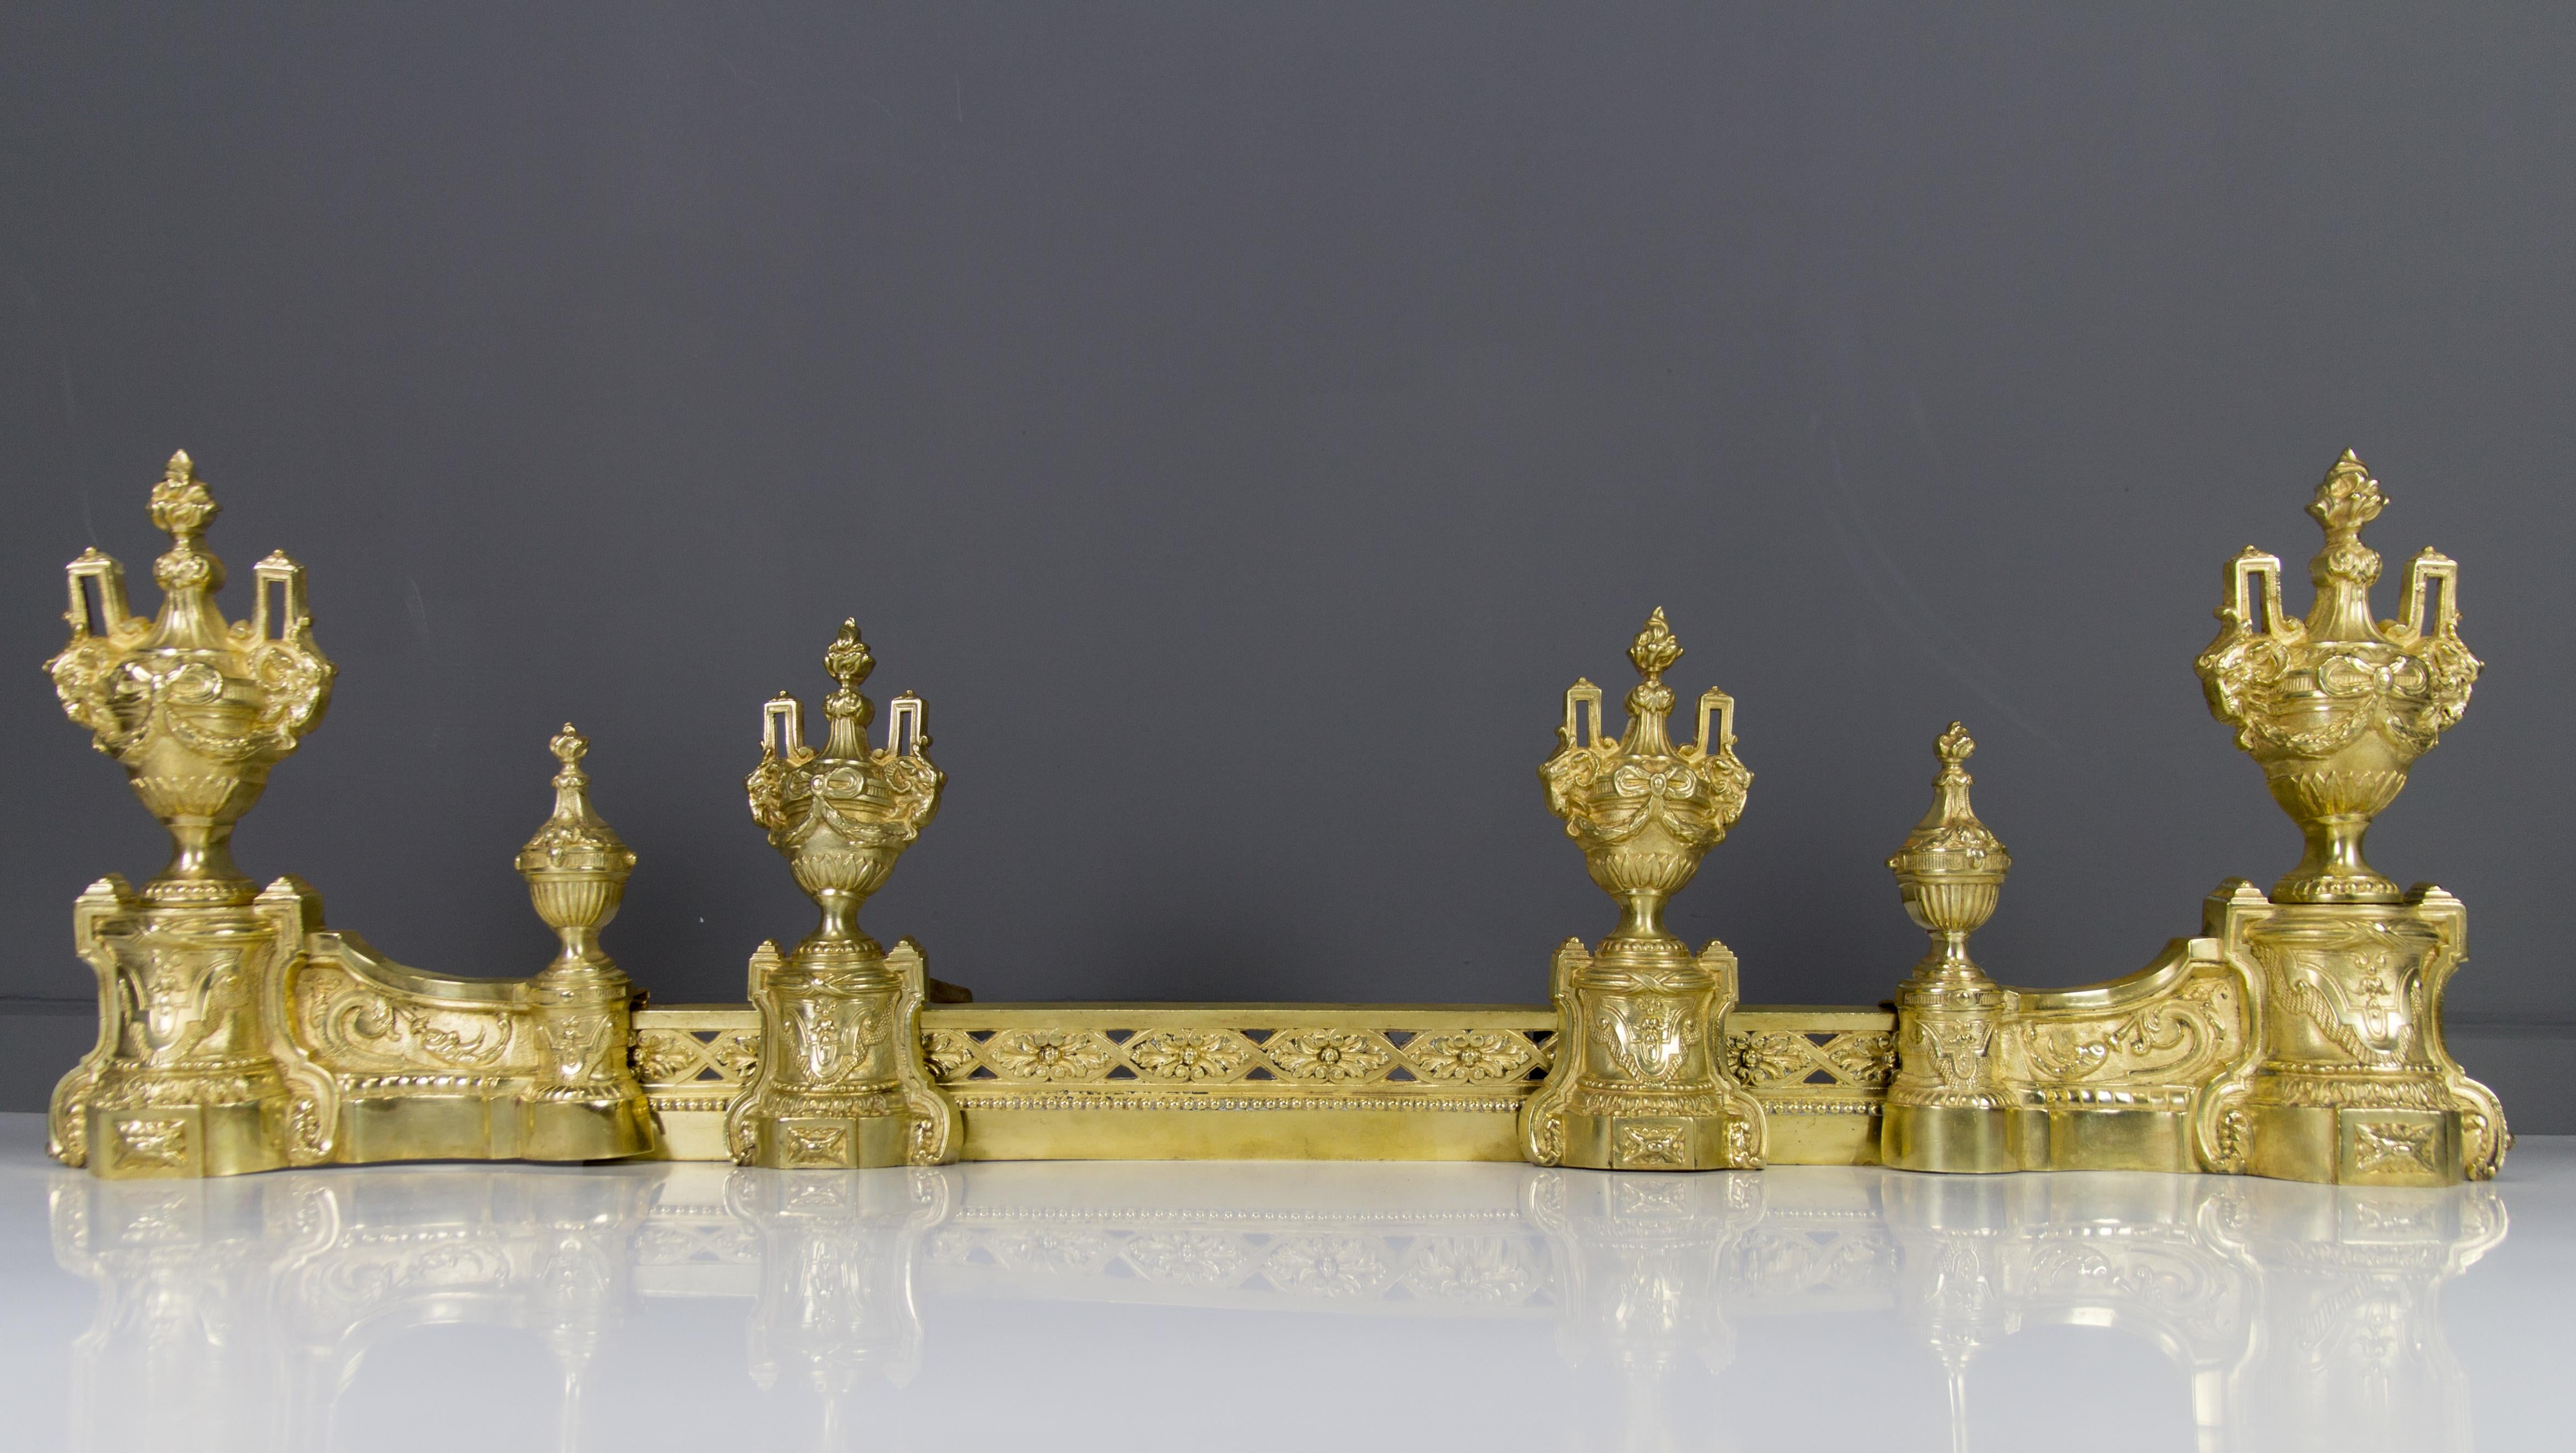 These impressive French Louis XVI style bronze andirons with their original fender date to the second half of the 1800s and are made by the famous French Bronzier Charles Casier. Richly ornate with ram heads, bows, drapes, foliate accents, urn, and